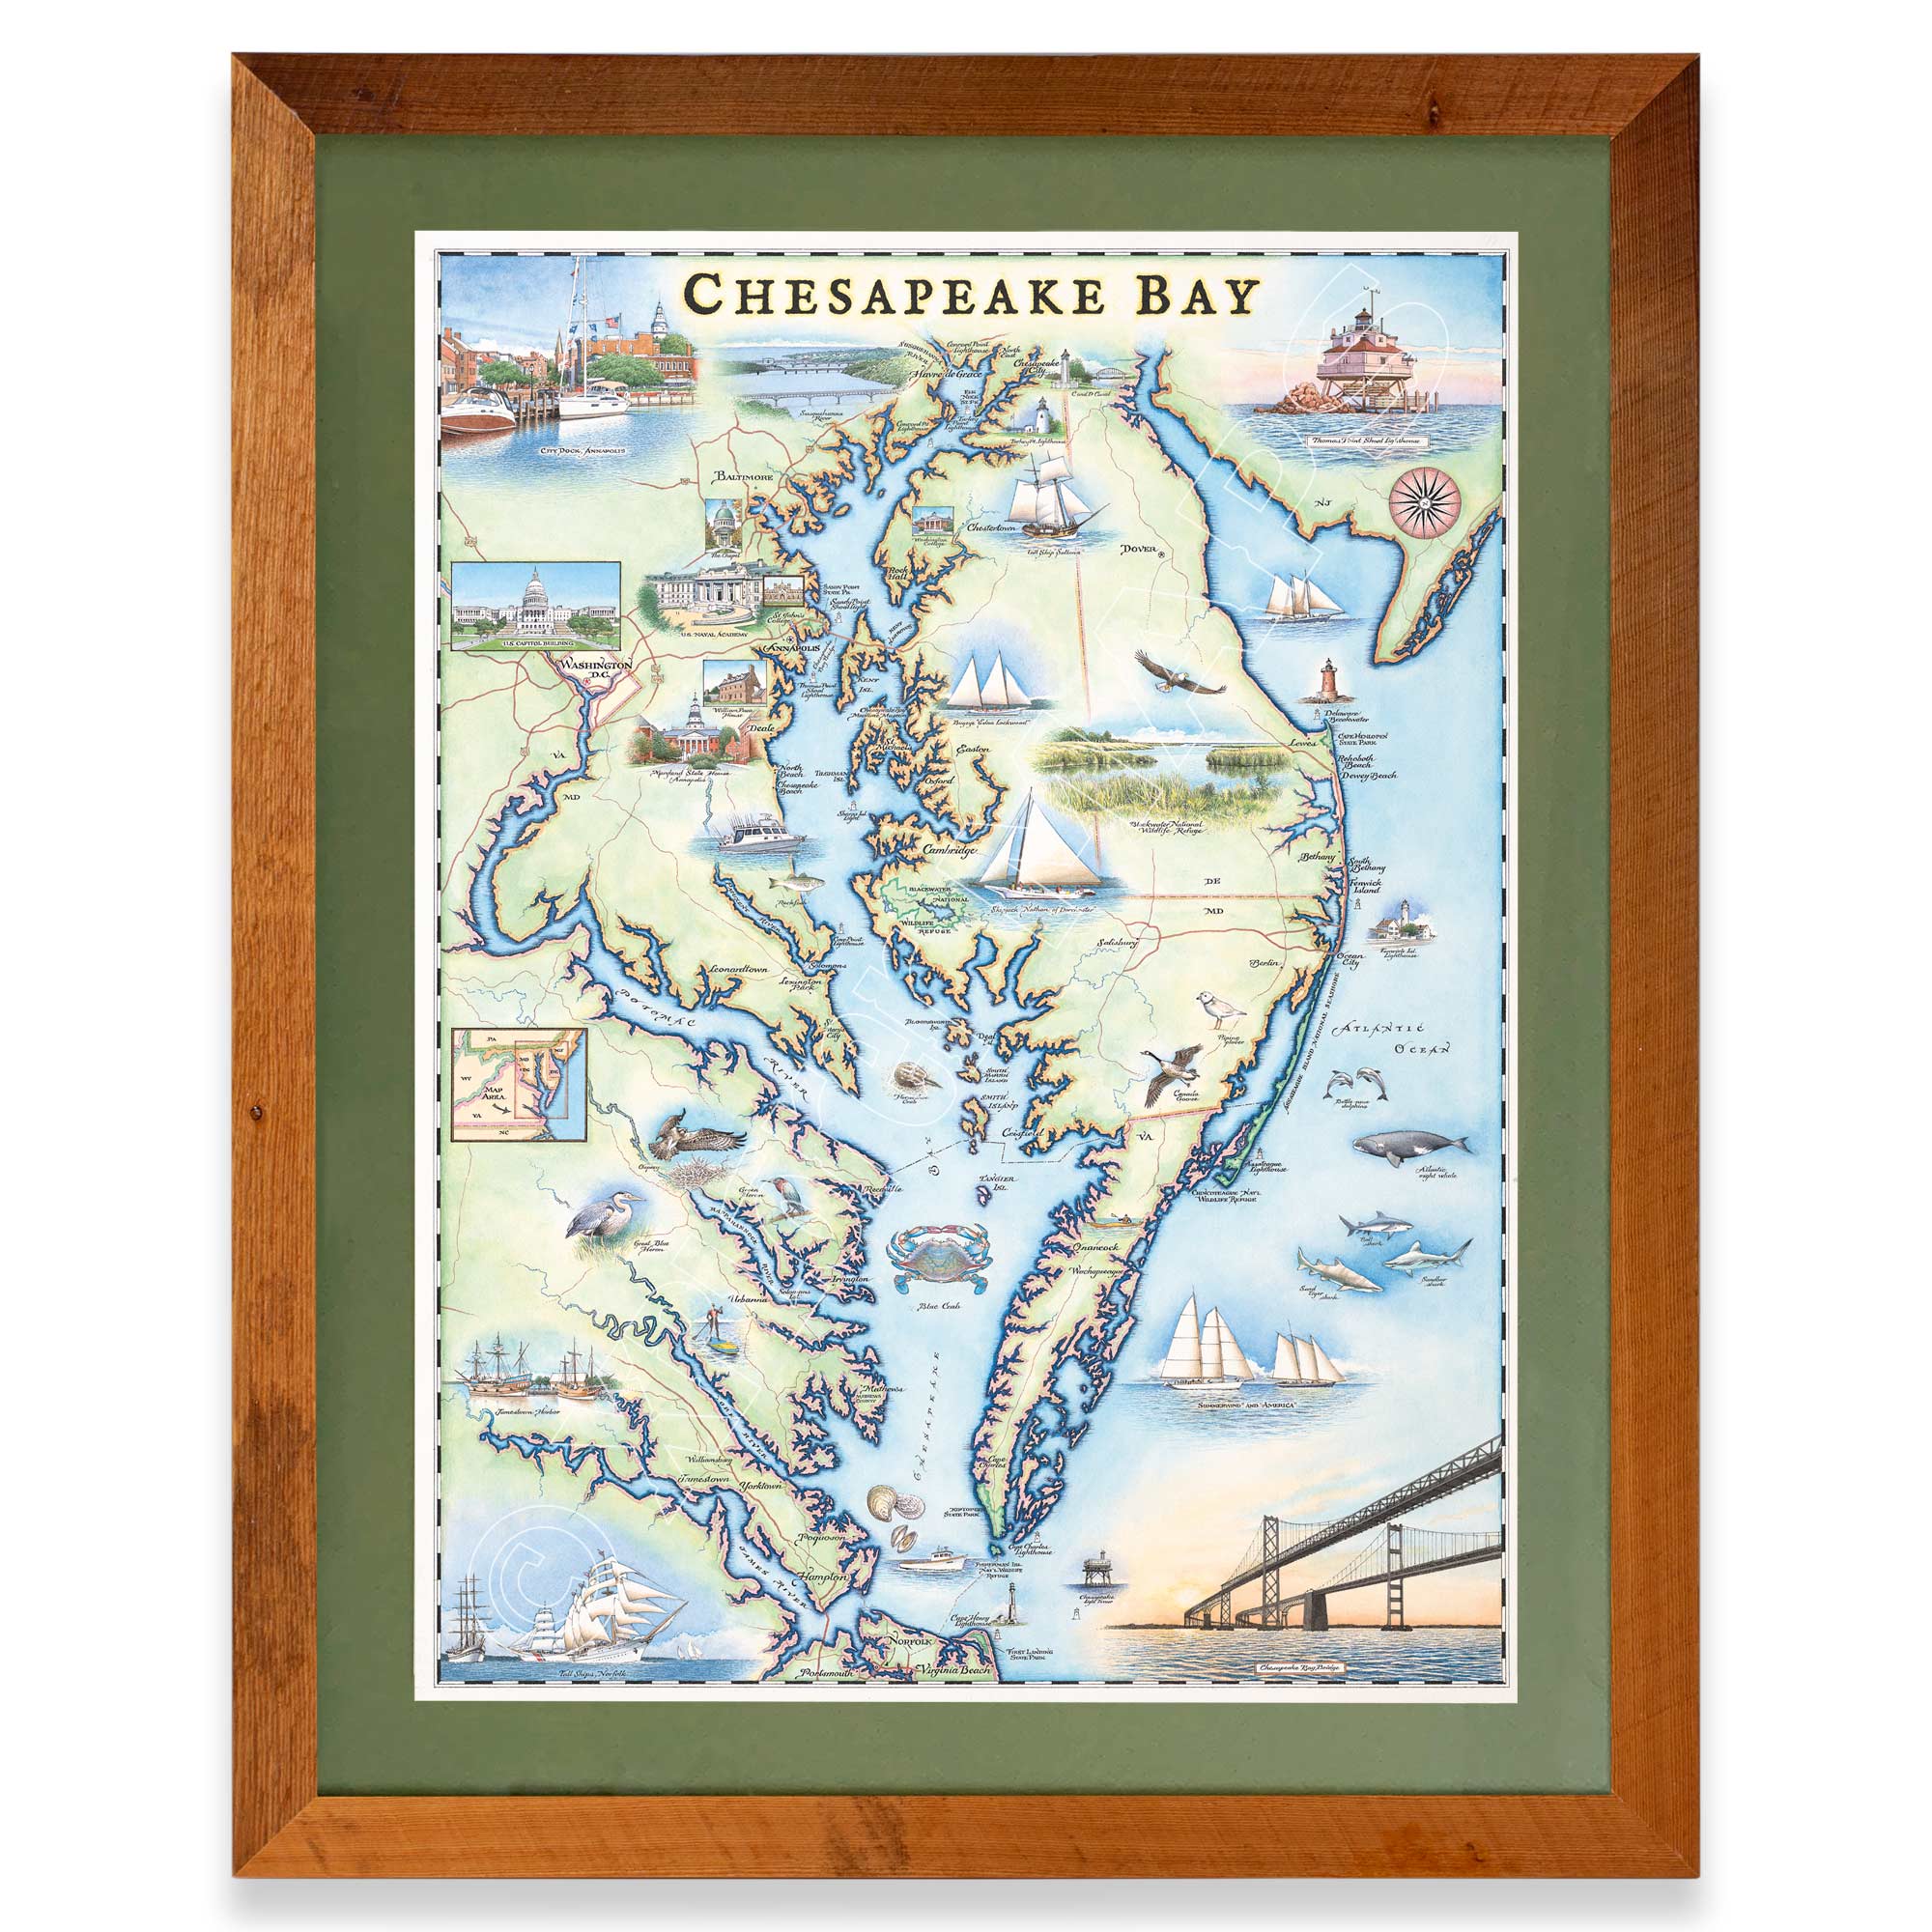 Chesapeake Bay hand-drawn map in a Montana Flathead Lake reclaimed larch wood frame and green mat. 